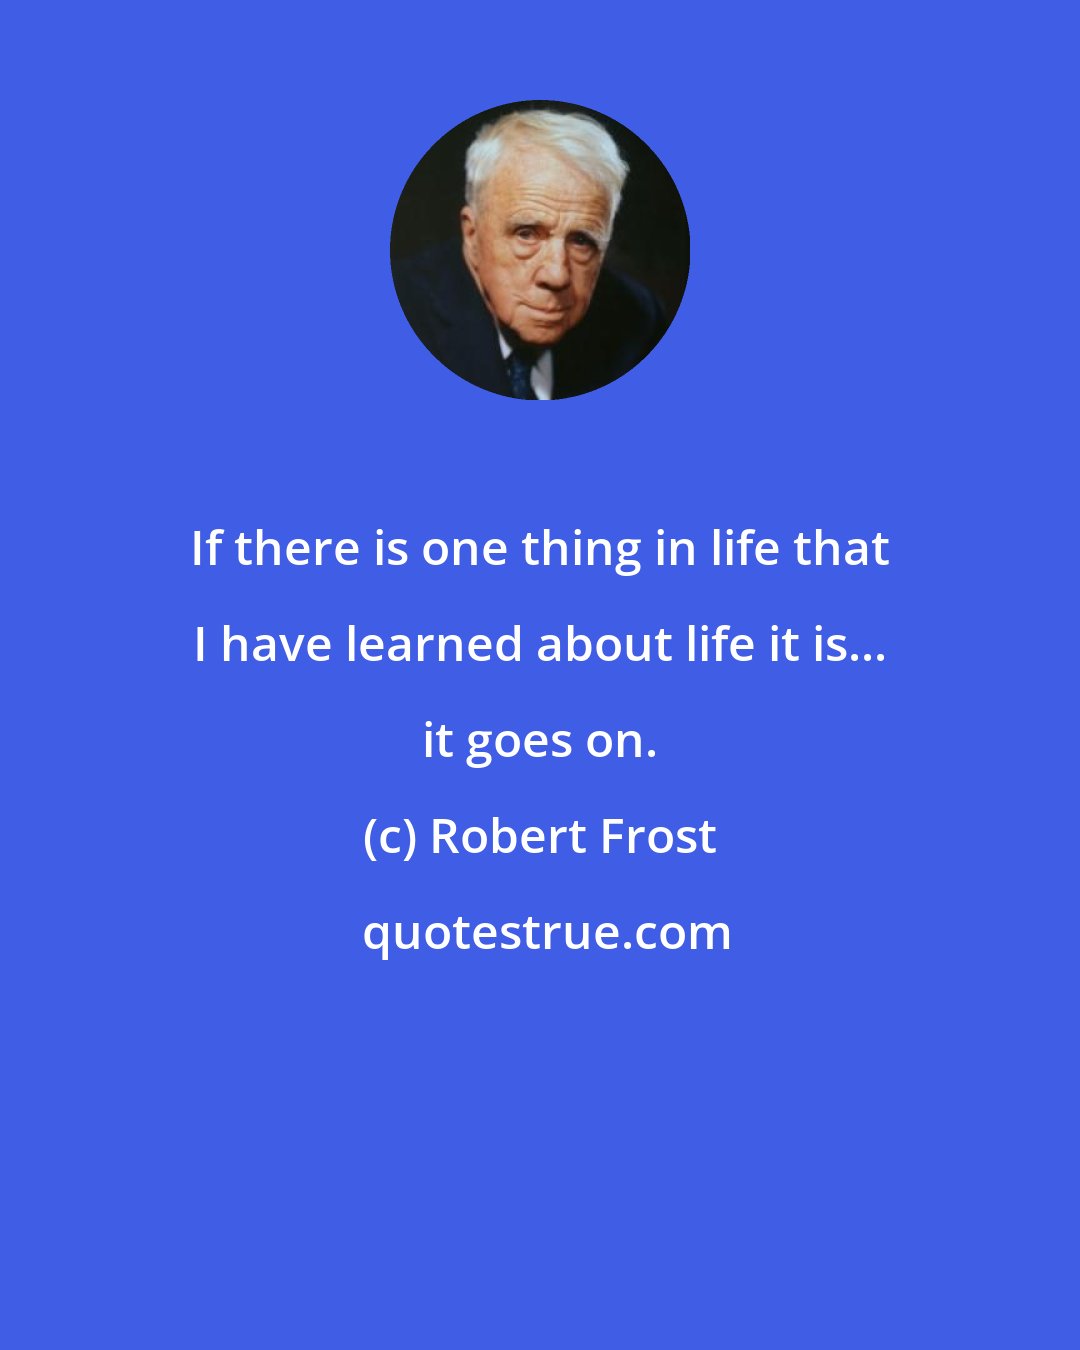 Robert Frost: If there is one thing in life that I have learned about life it is... it goes on.